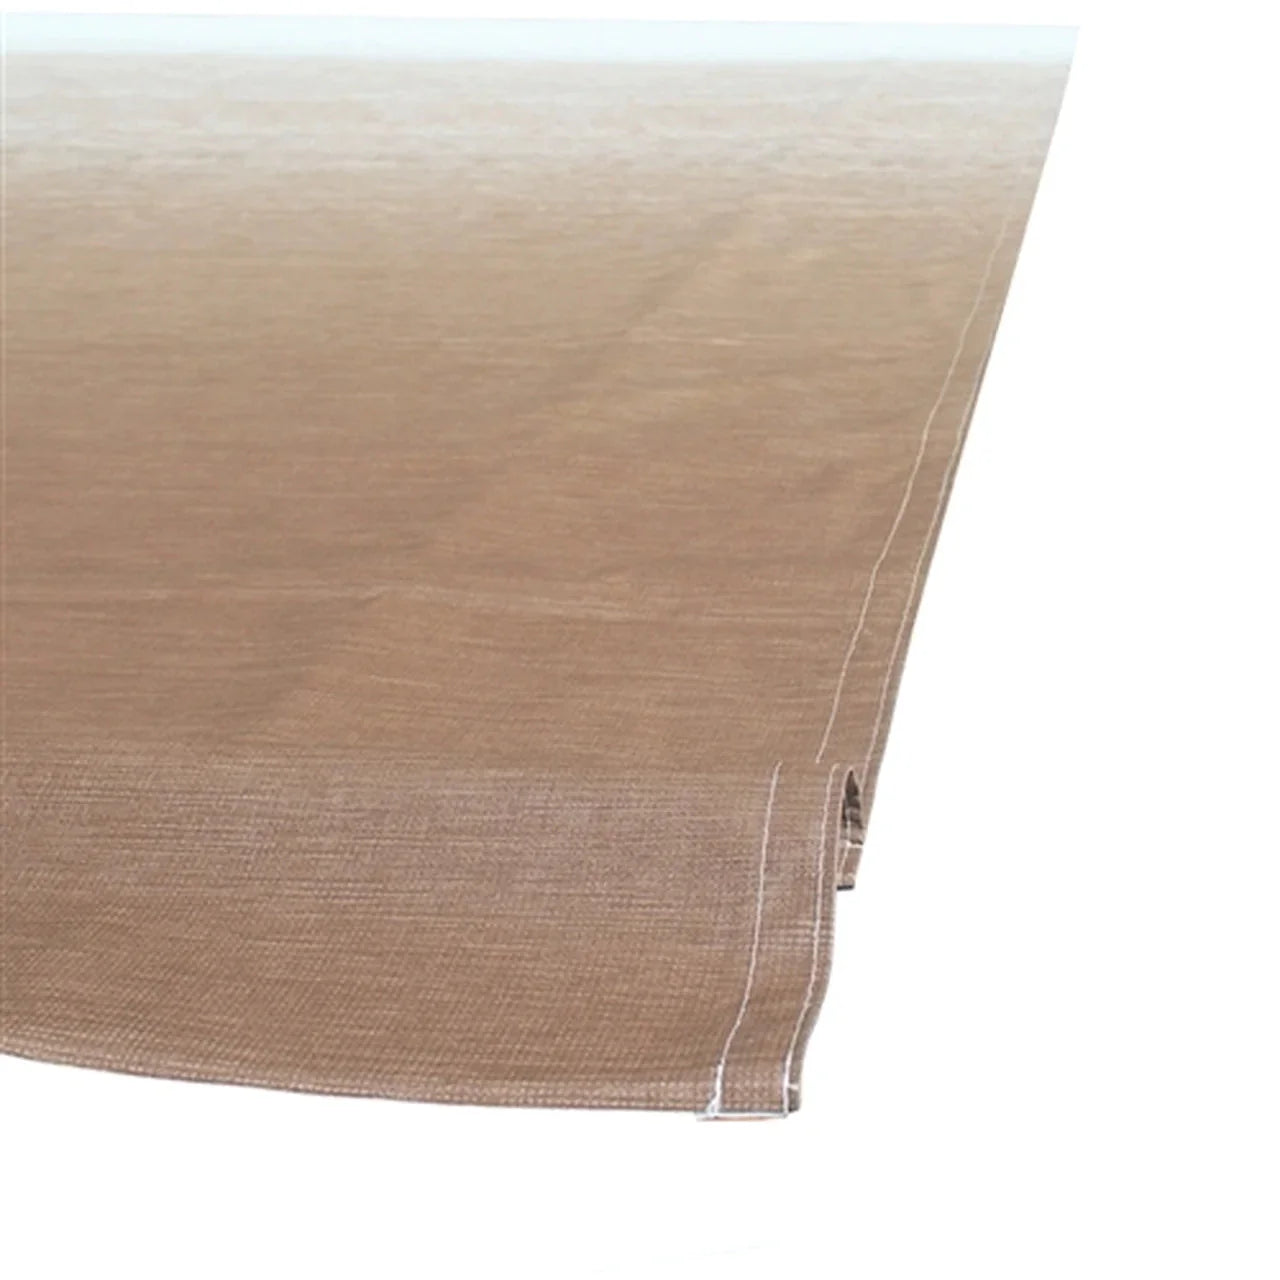 Aleko RV Awning Fabric Replacement - 8 X 8 ft (2.4 x 2.4 m)